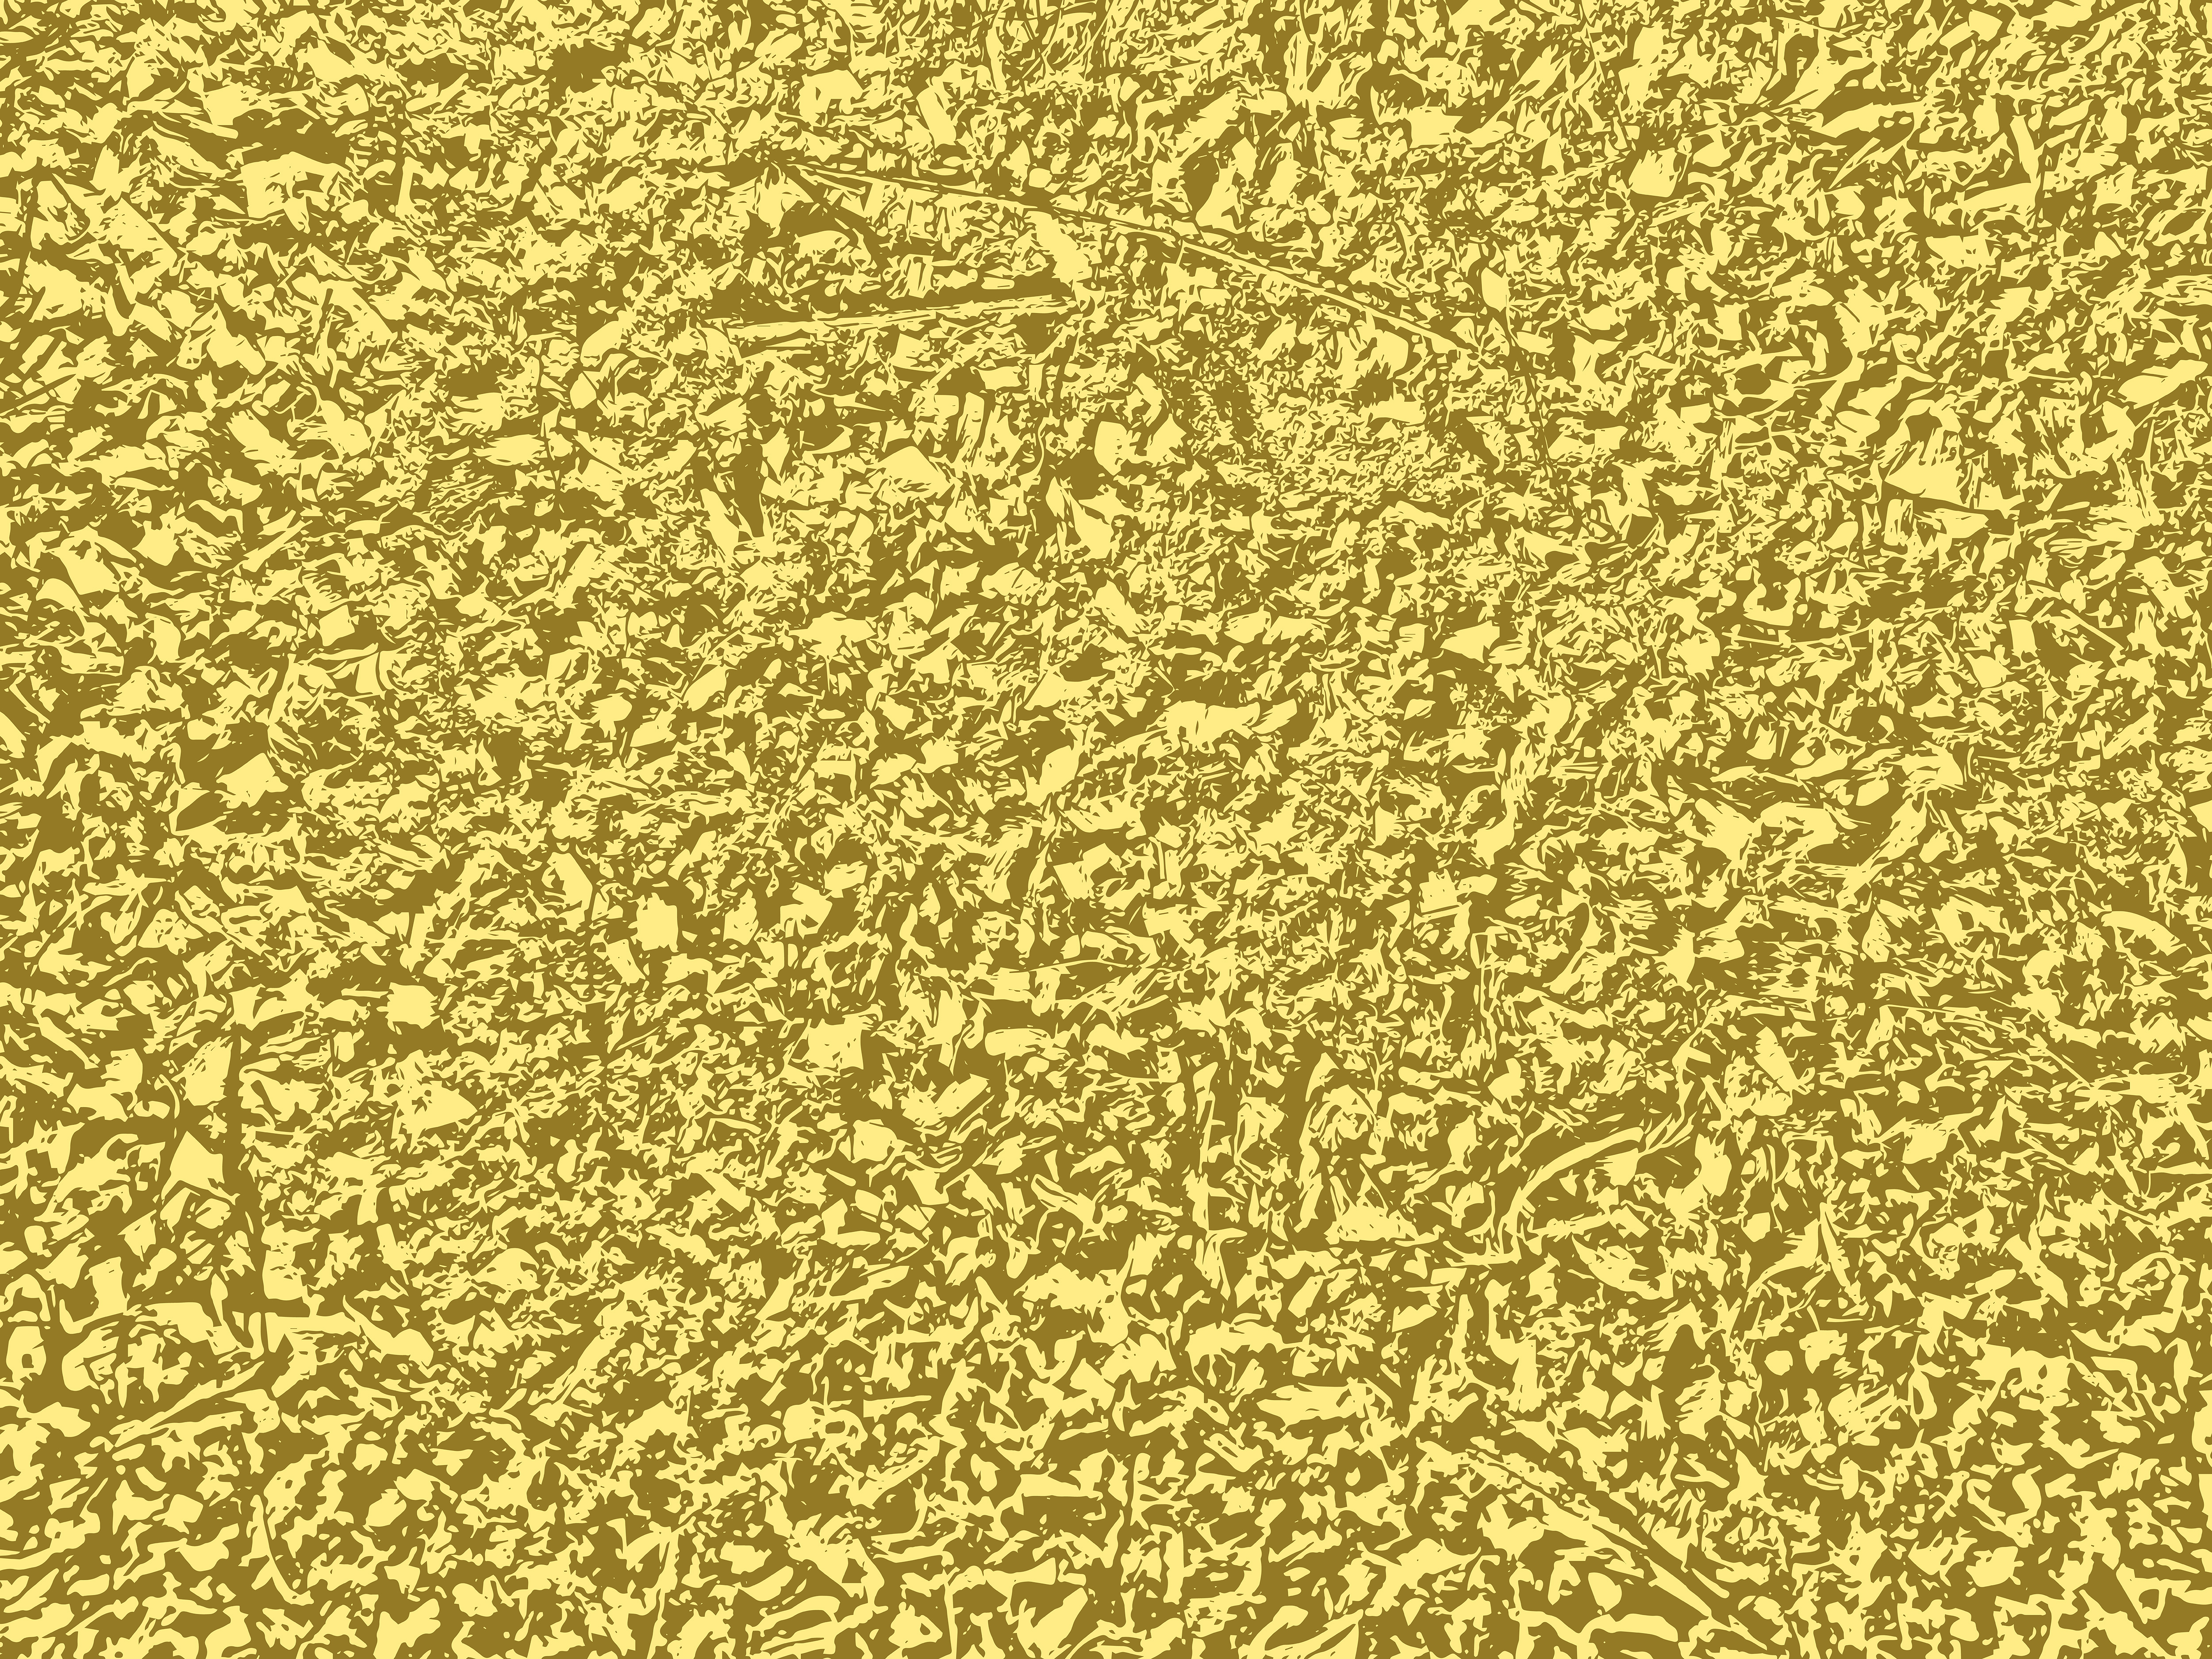 Gold Foil Looking Background.